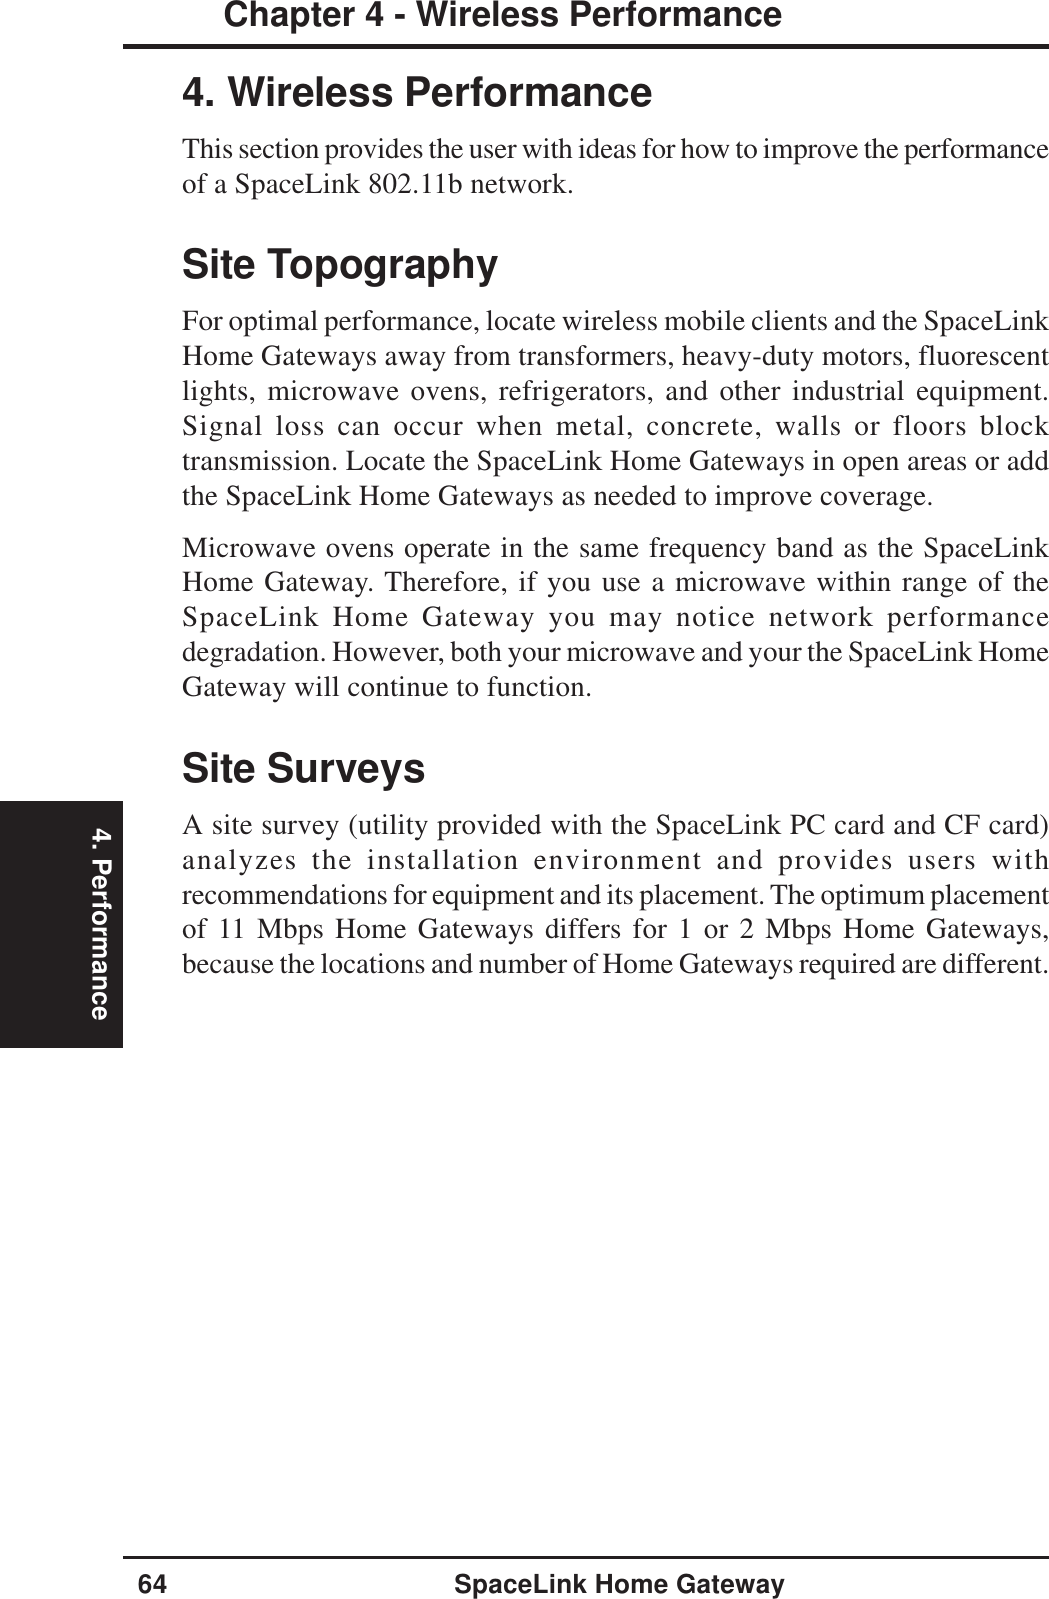 4. Performance64 SpaceLink Home GatewayChapter 4 - Wireless Performance4. Wireless PerformanceThis section provides the user with ideas for how to improve the performanceof a SpaceLink 802.11b network.Site TopographyFor optimal performance, locate wireless mobile clients and the SpaceLinkHome Gateways away from transformers, heavy-duty motors, fluorescentlights, microwave ovens, refrigerators, and other industrial equipment.Signal loss can occur when metal, concrete, walls or floors blocktransmission. Locate the SpaceLink Home Gateways in open areas or addthe SpaceLink Home Gateways as needed to improve coverage.Microwave ovens operate in the same frequency band as the SpaceLinkHome Gateway. Therefore, if you use a microwave within range of theSpaceLink Home Gateway you may notice network performancedegradation. However, both your microwave and your the SpaceLink HomeGateway will continue to function.Site SurveysA site survey (utility provided with the SpaceLink PC card and CF card)analyzes the installation environment and provides users withrecommendations for equipment and its placement. The optimum placementof 11 Mbps Home Gateways differs for 1 or 2 Mbps Home Gateways,because the locations and number of Home Gateways required are different.